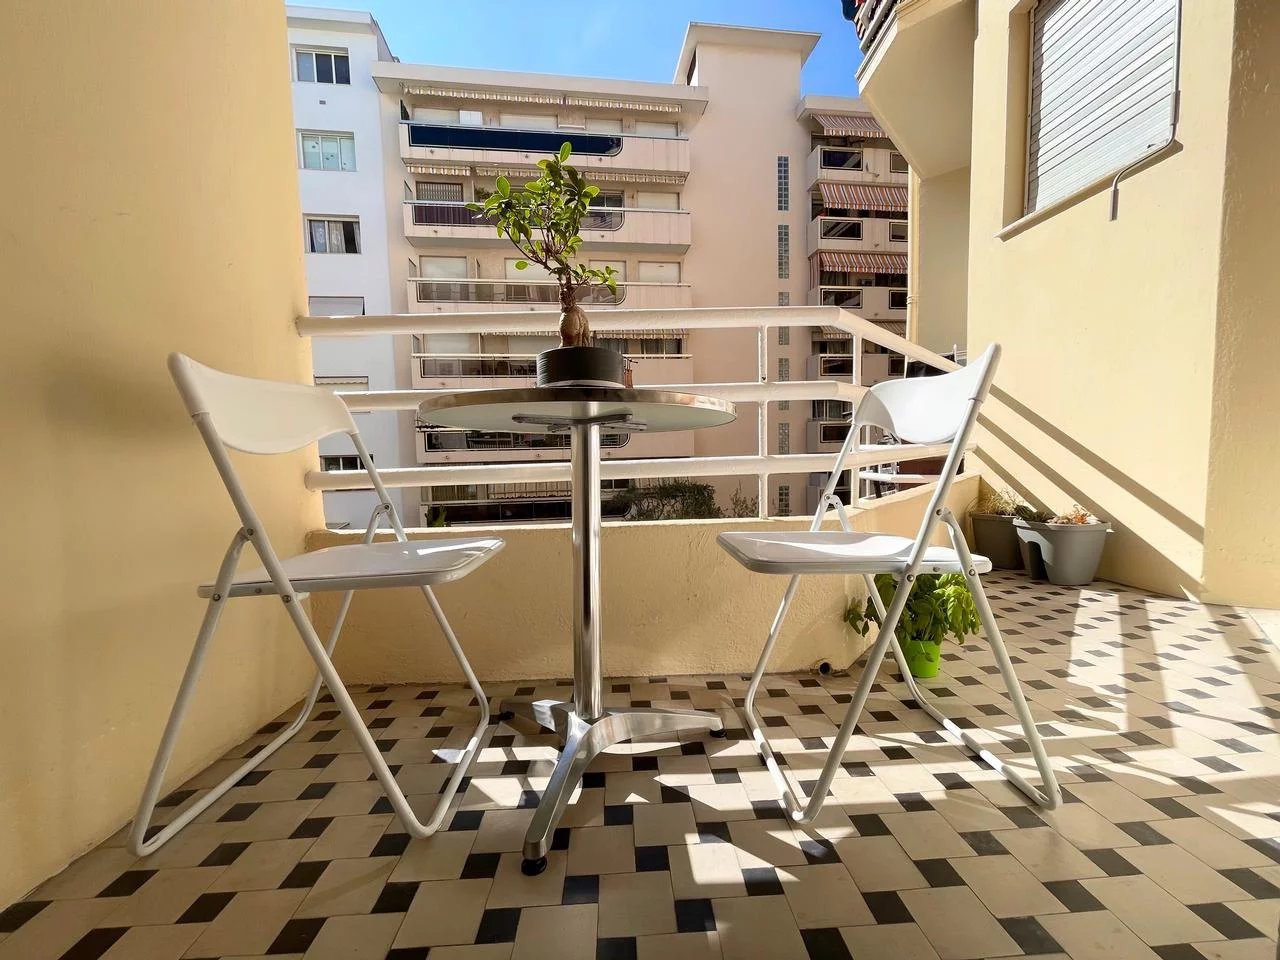 Appartement  2 Rooms 41.19m2  for sale   295 000 €